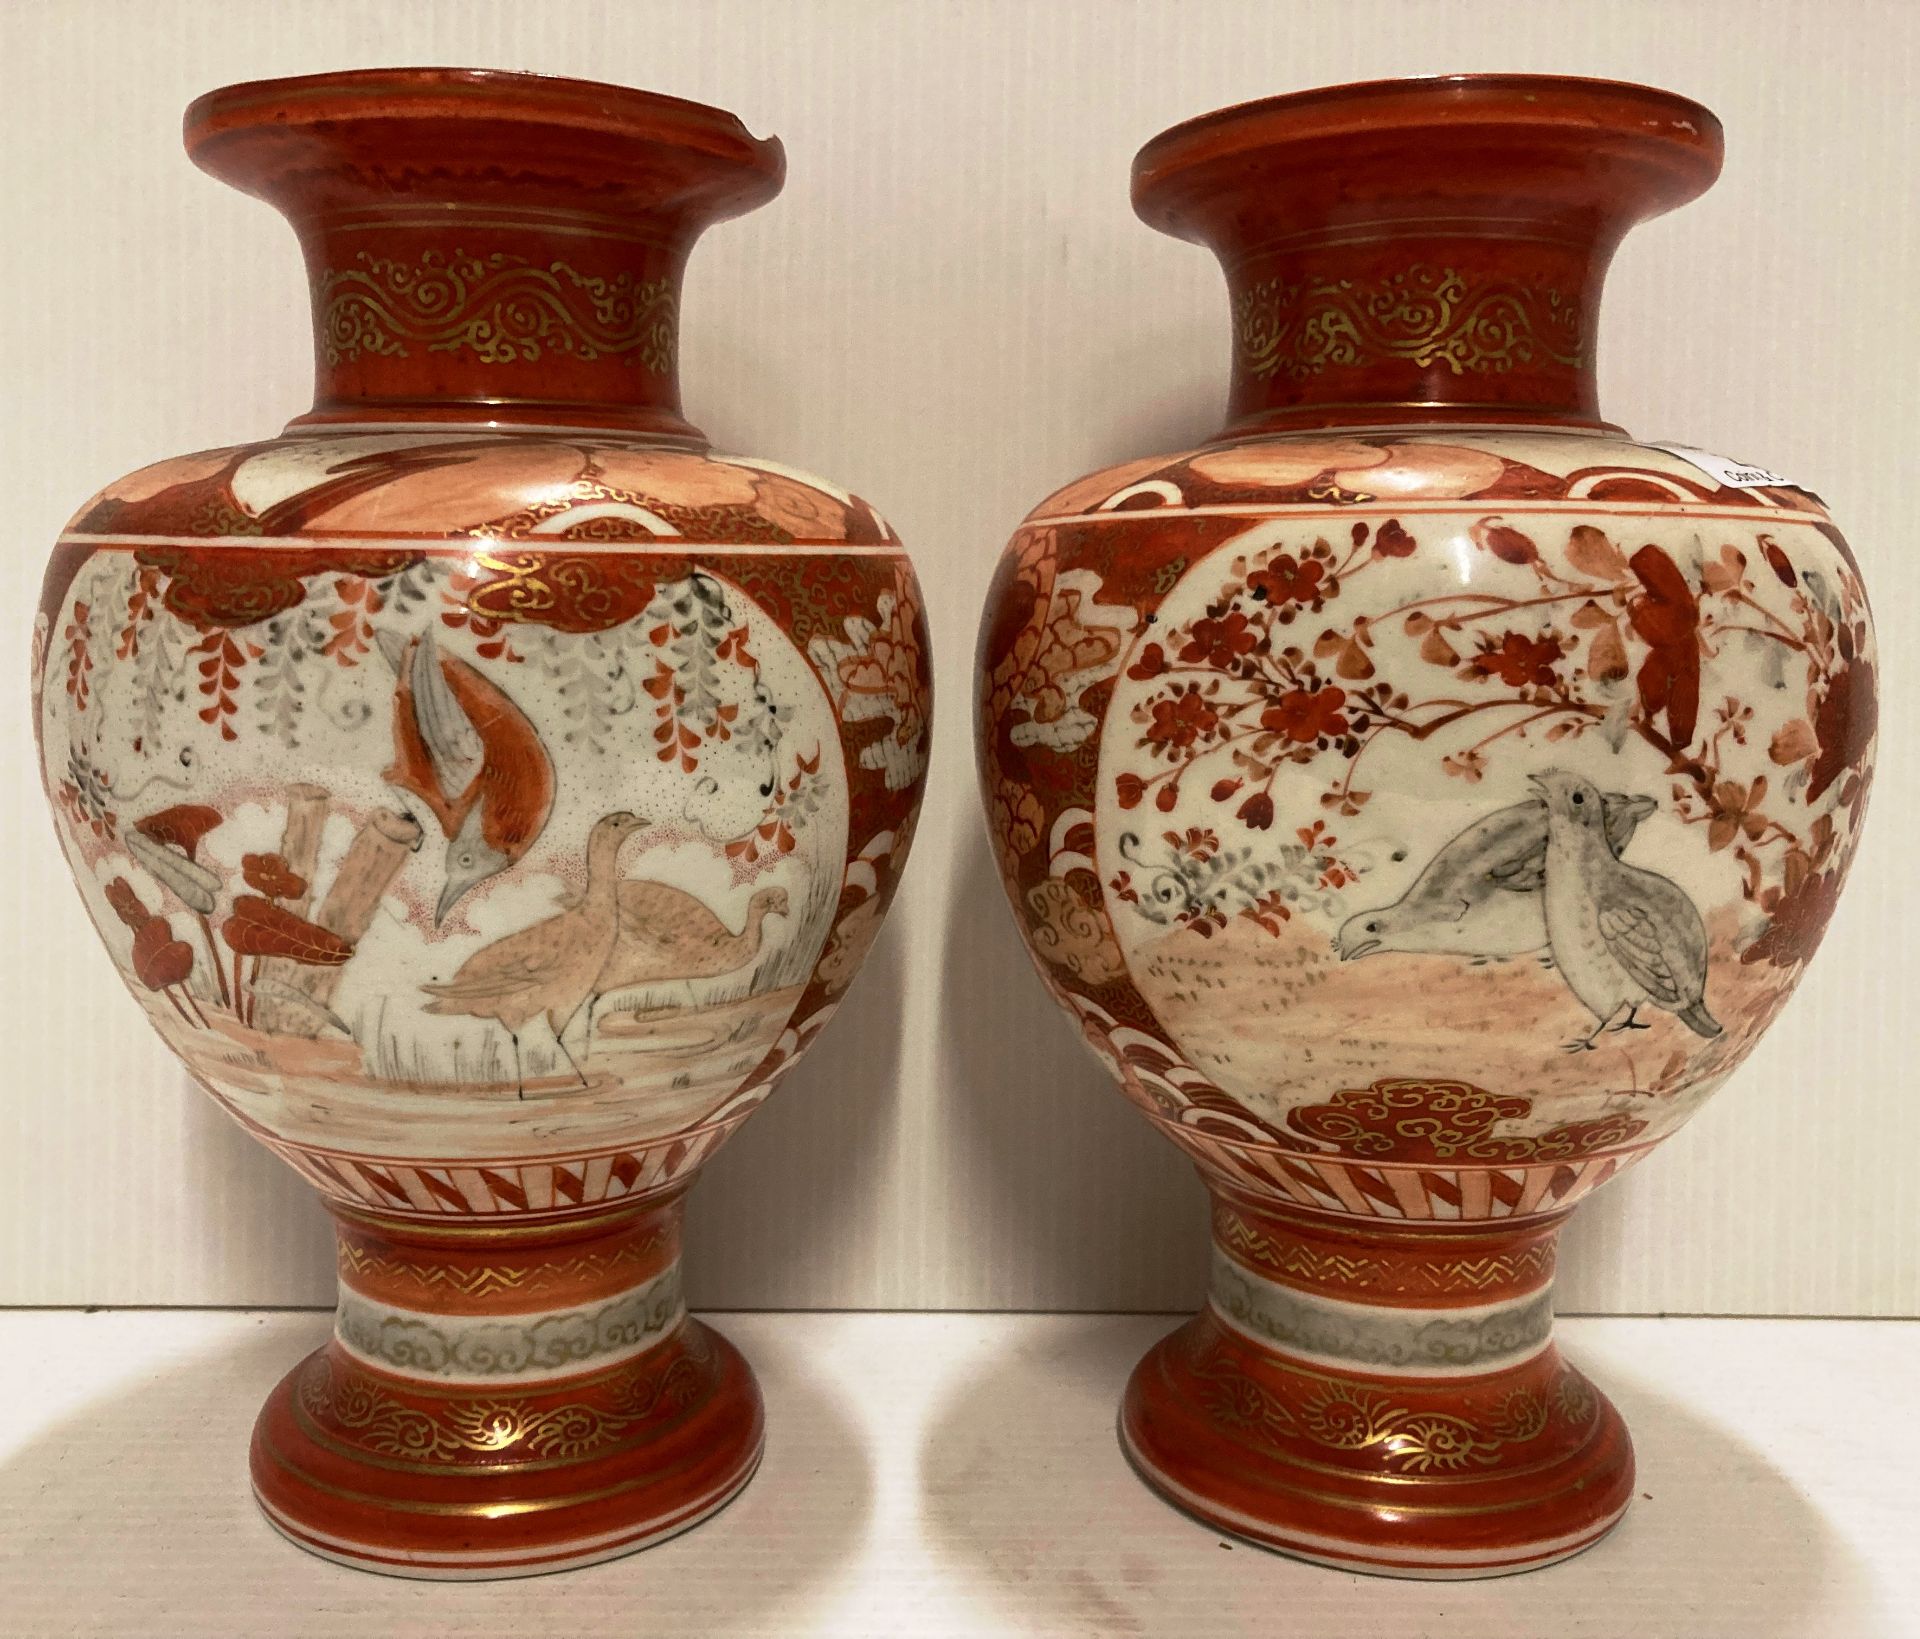 Pair of Oriental orange patterned vases each 23cm high (both with damages to rim)